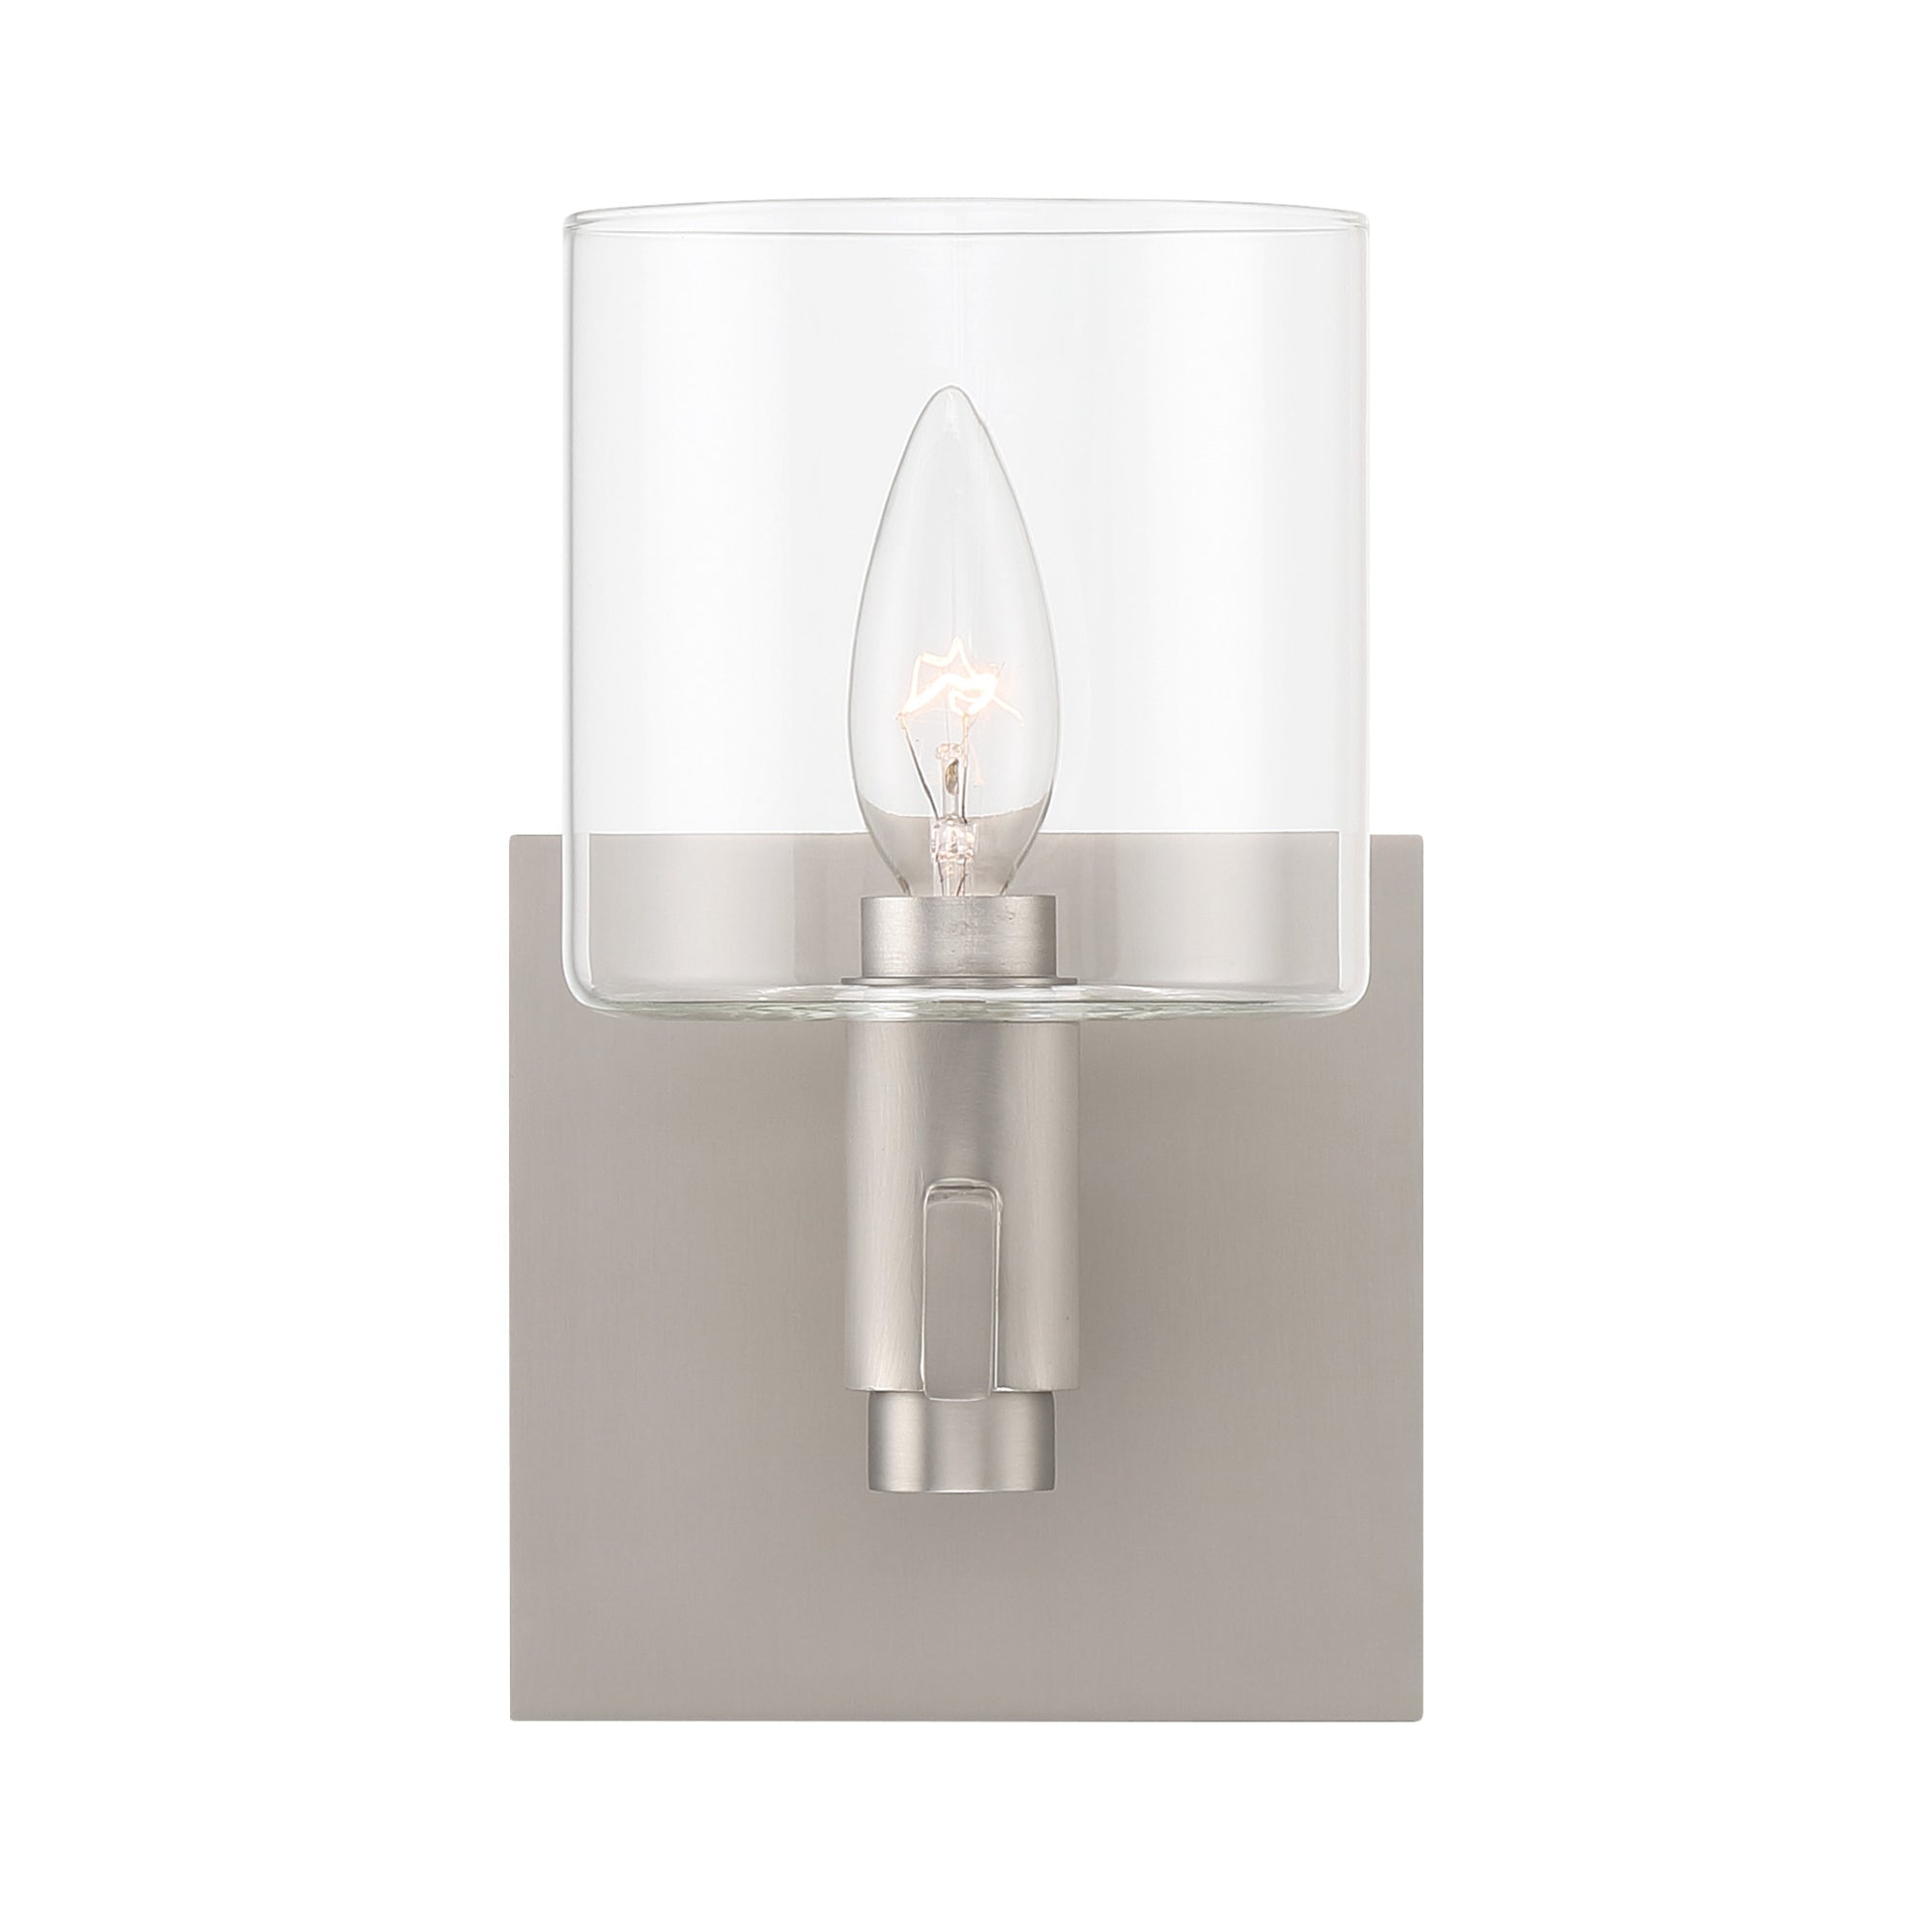 DECATO Wall sconce Nickel - 46811-028 | EUROFASE